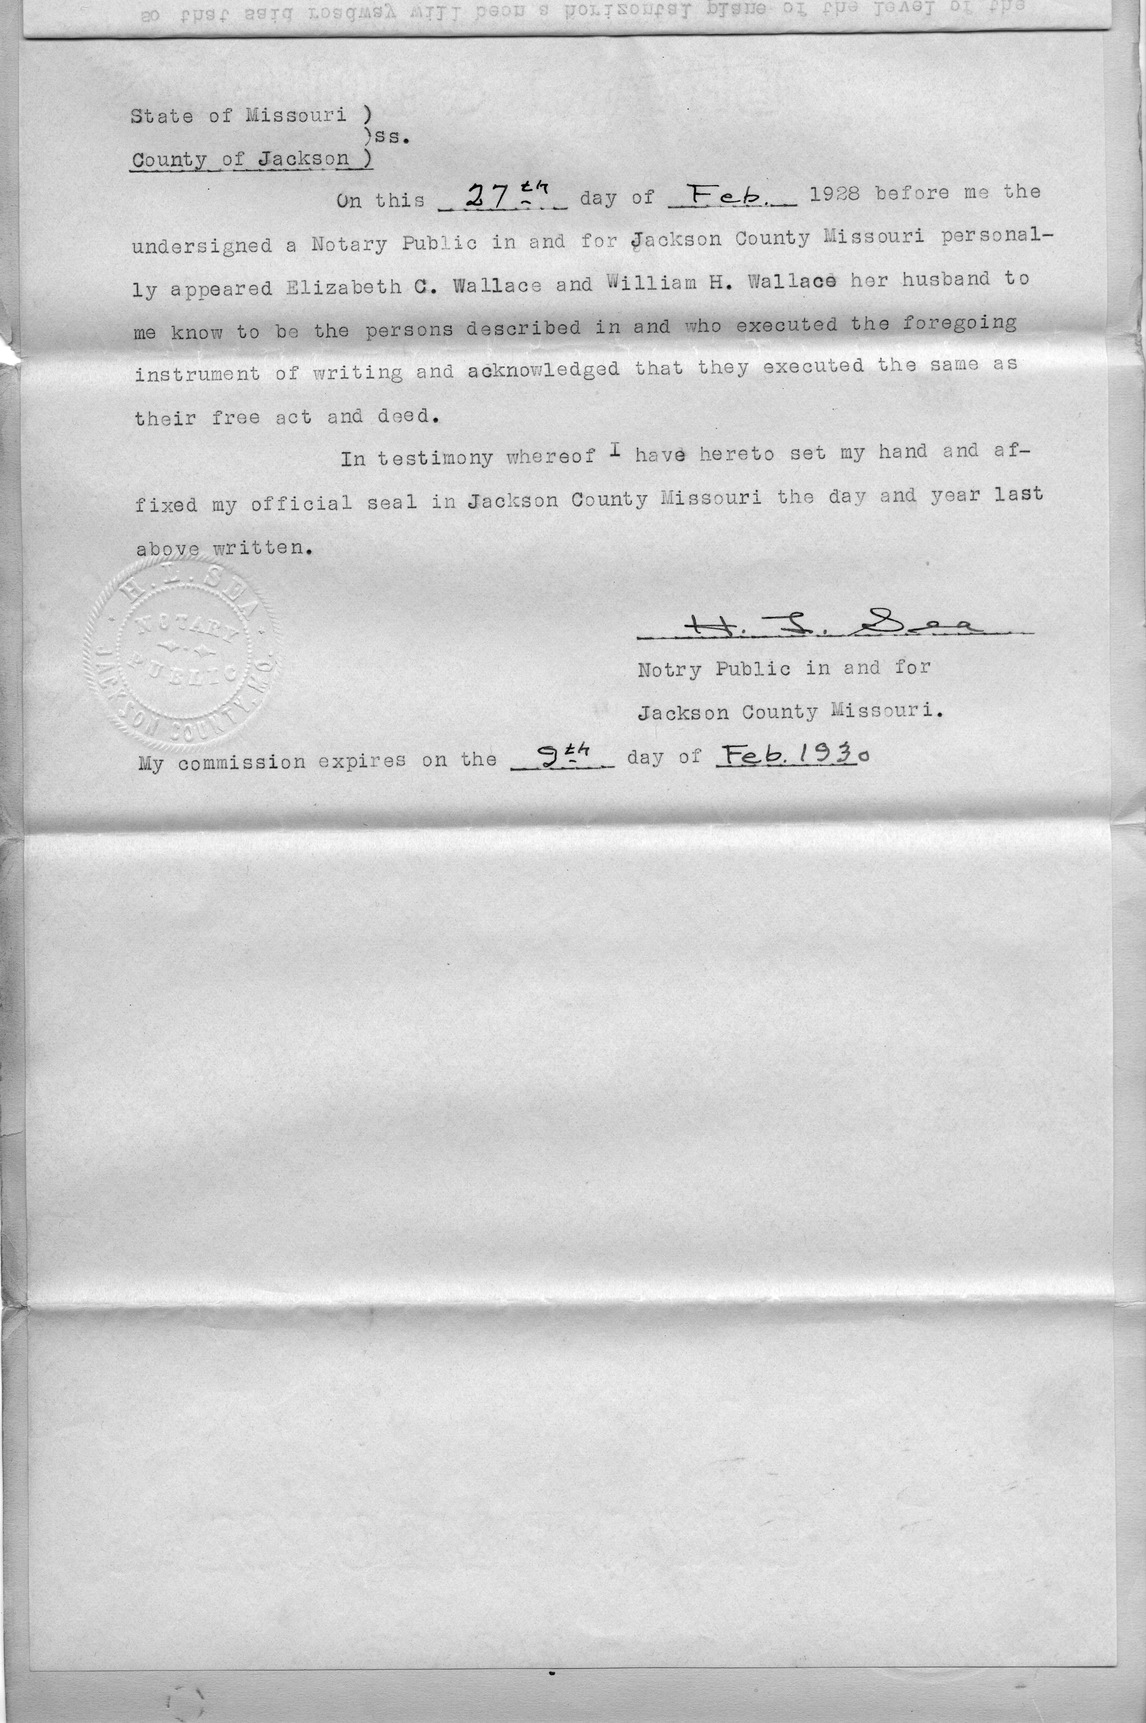 Warranty Deed from Elizabeth C. Wallace and William H. Wallace to Lake Lotawana Development Company